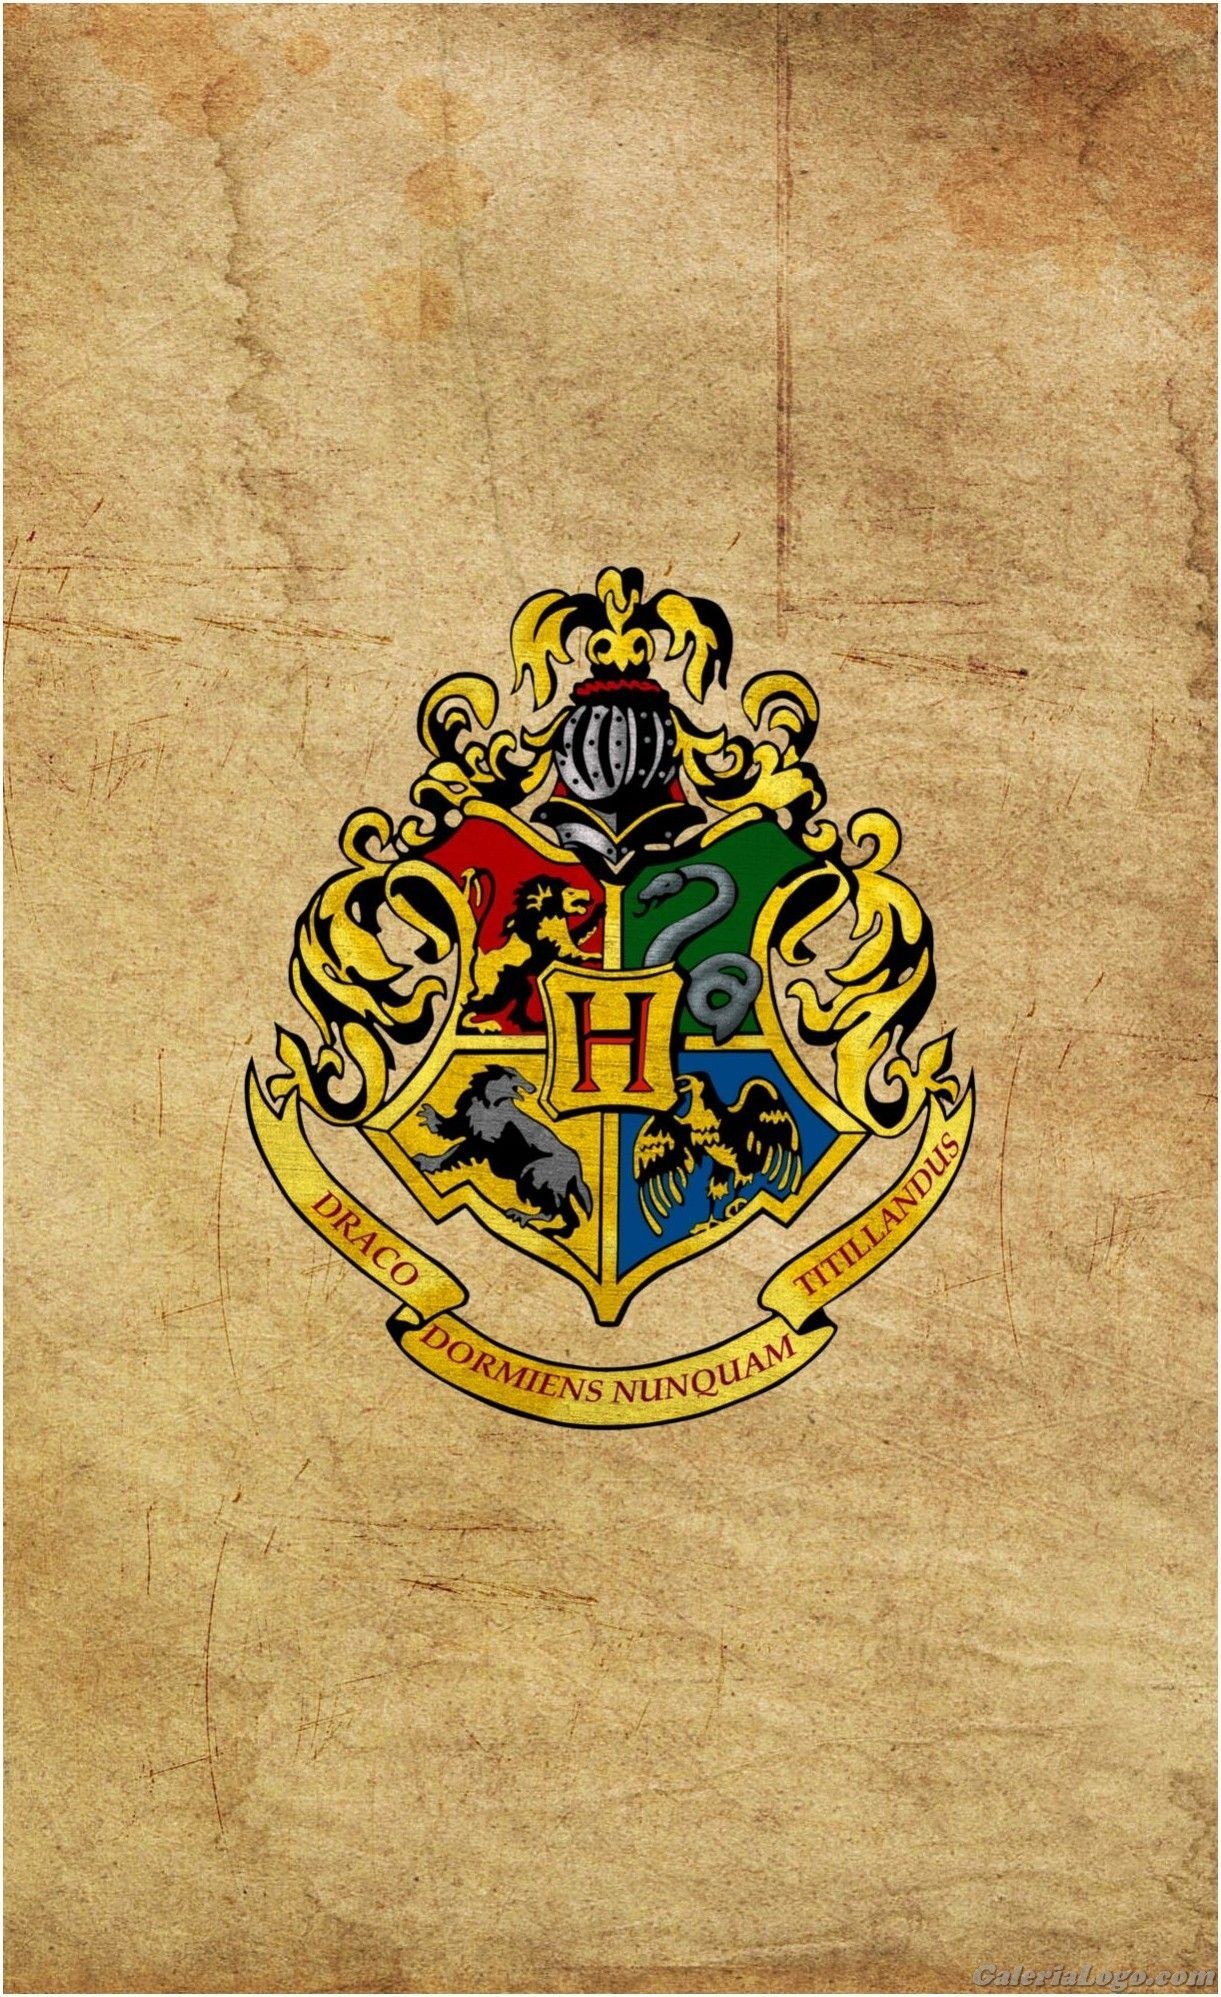 iPhone wallpaper, Harry Potter background, Phone decor, Movie-inspired, 1230x2000 HD Handy